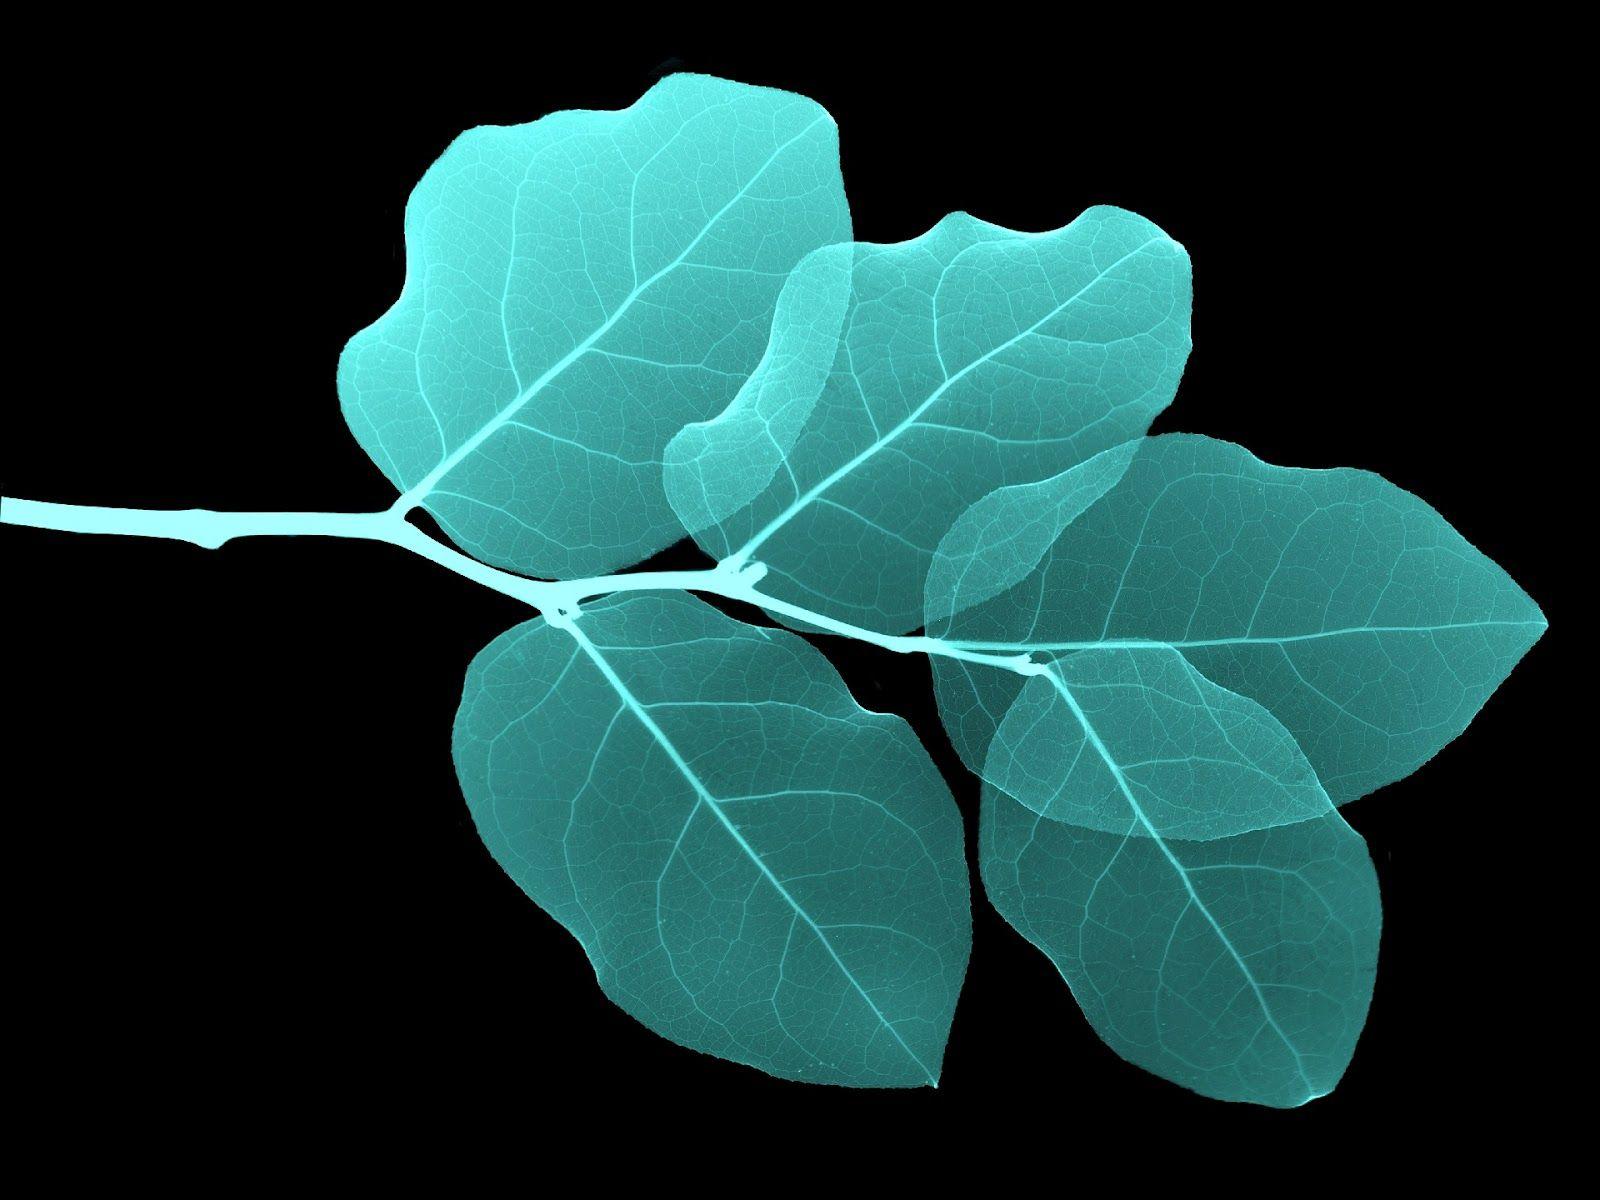 Leaves Background. Black and White Wallpaper: Turquoise Leaves